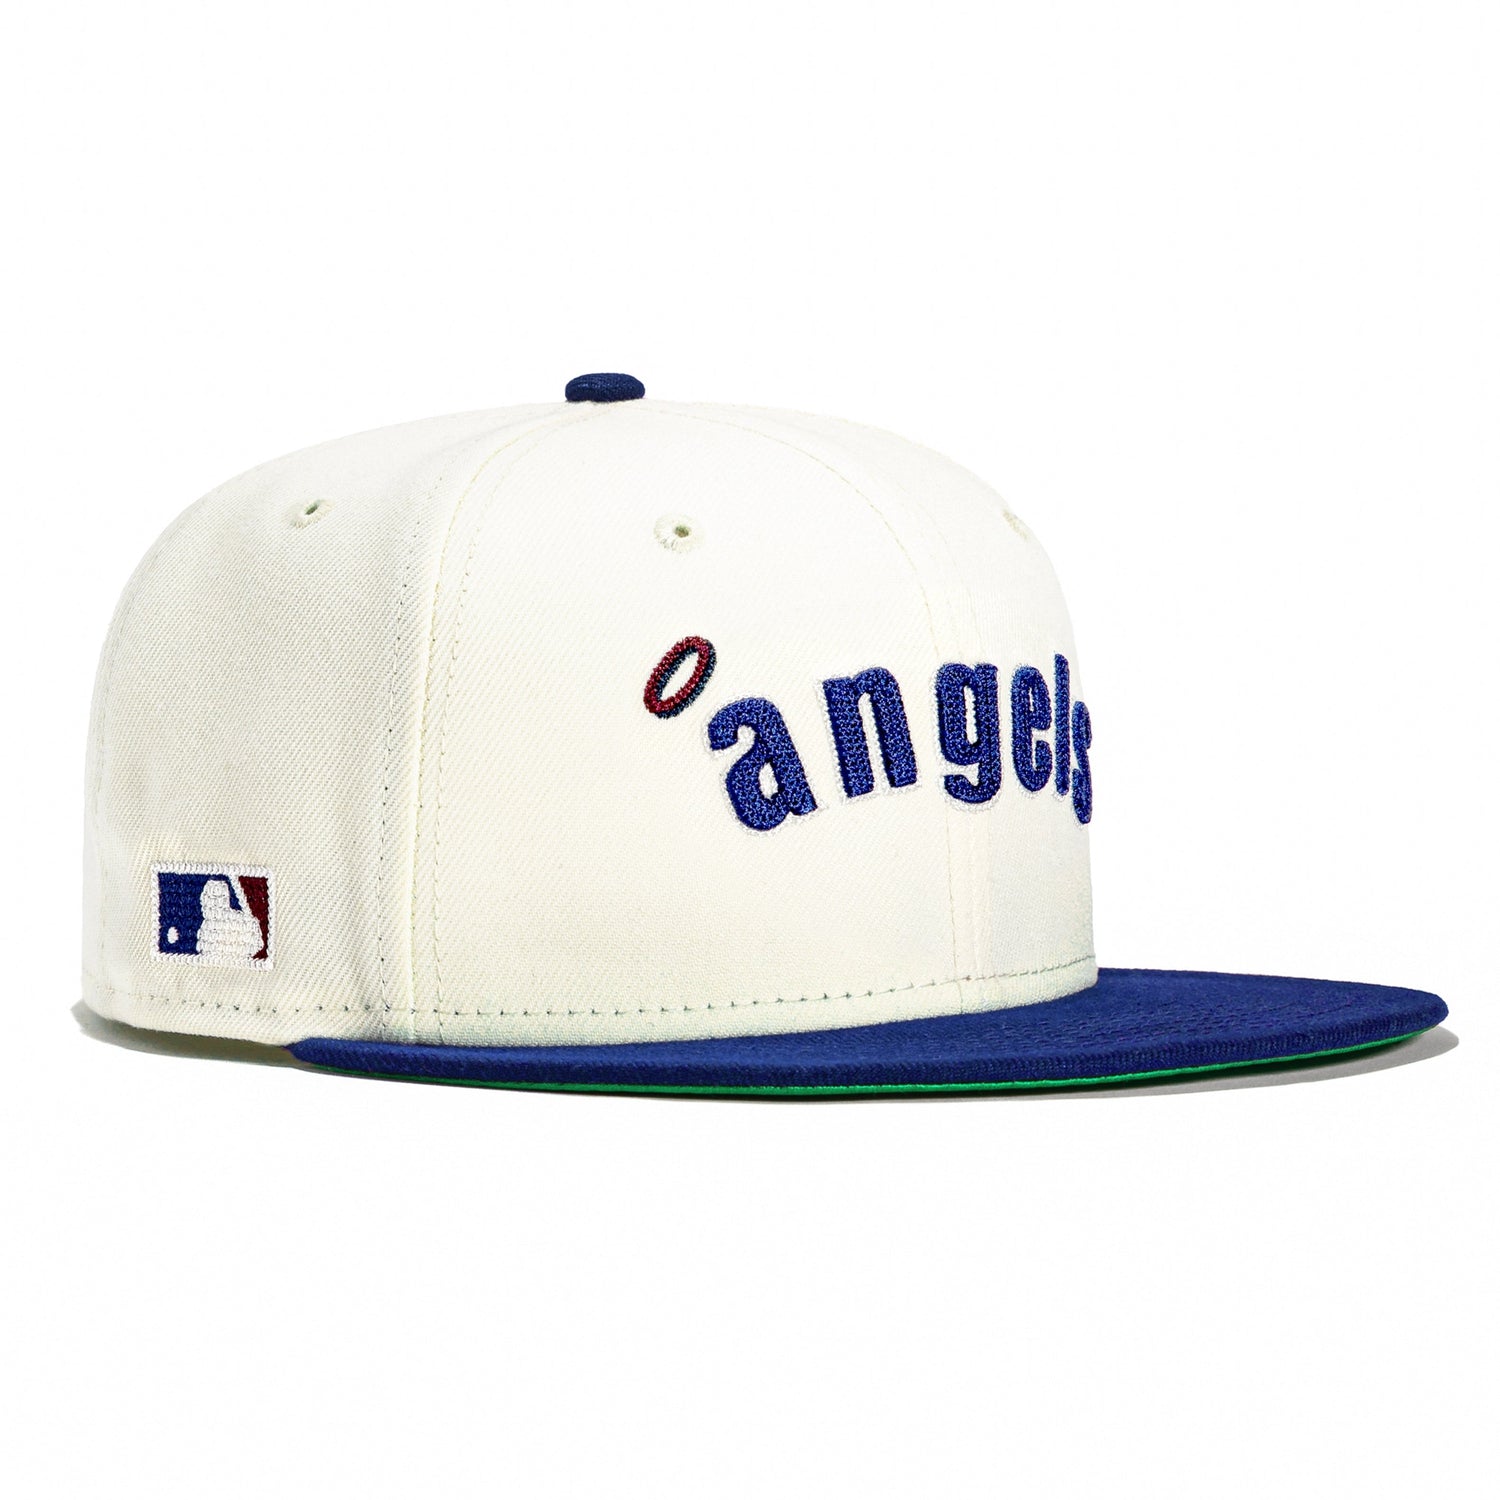 New Era 59FIFTY Chain Stitch Los Angeles Angels Hat - White, Royal White/Royal / 7 1/2